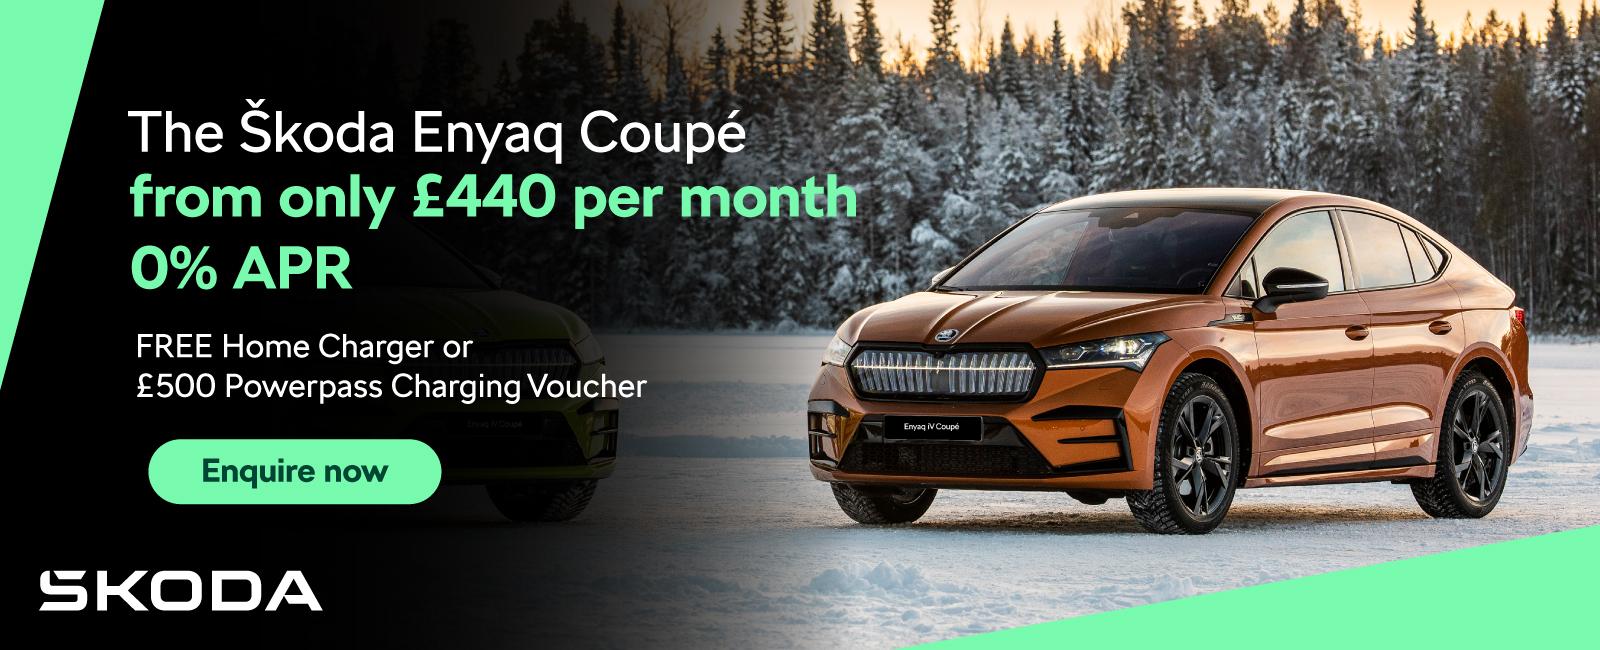 The Skoda Enyaq Coupe from only £440 per month with 0% APR finance